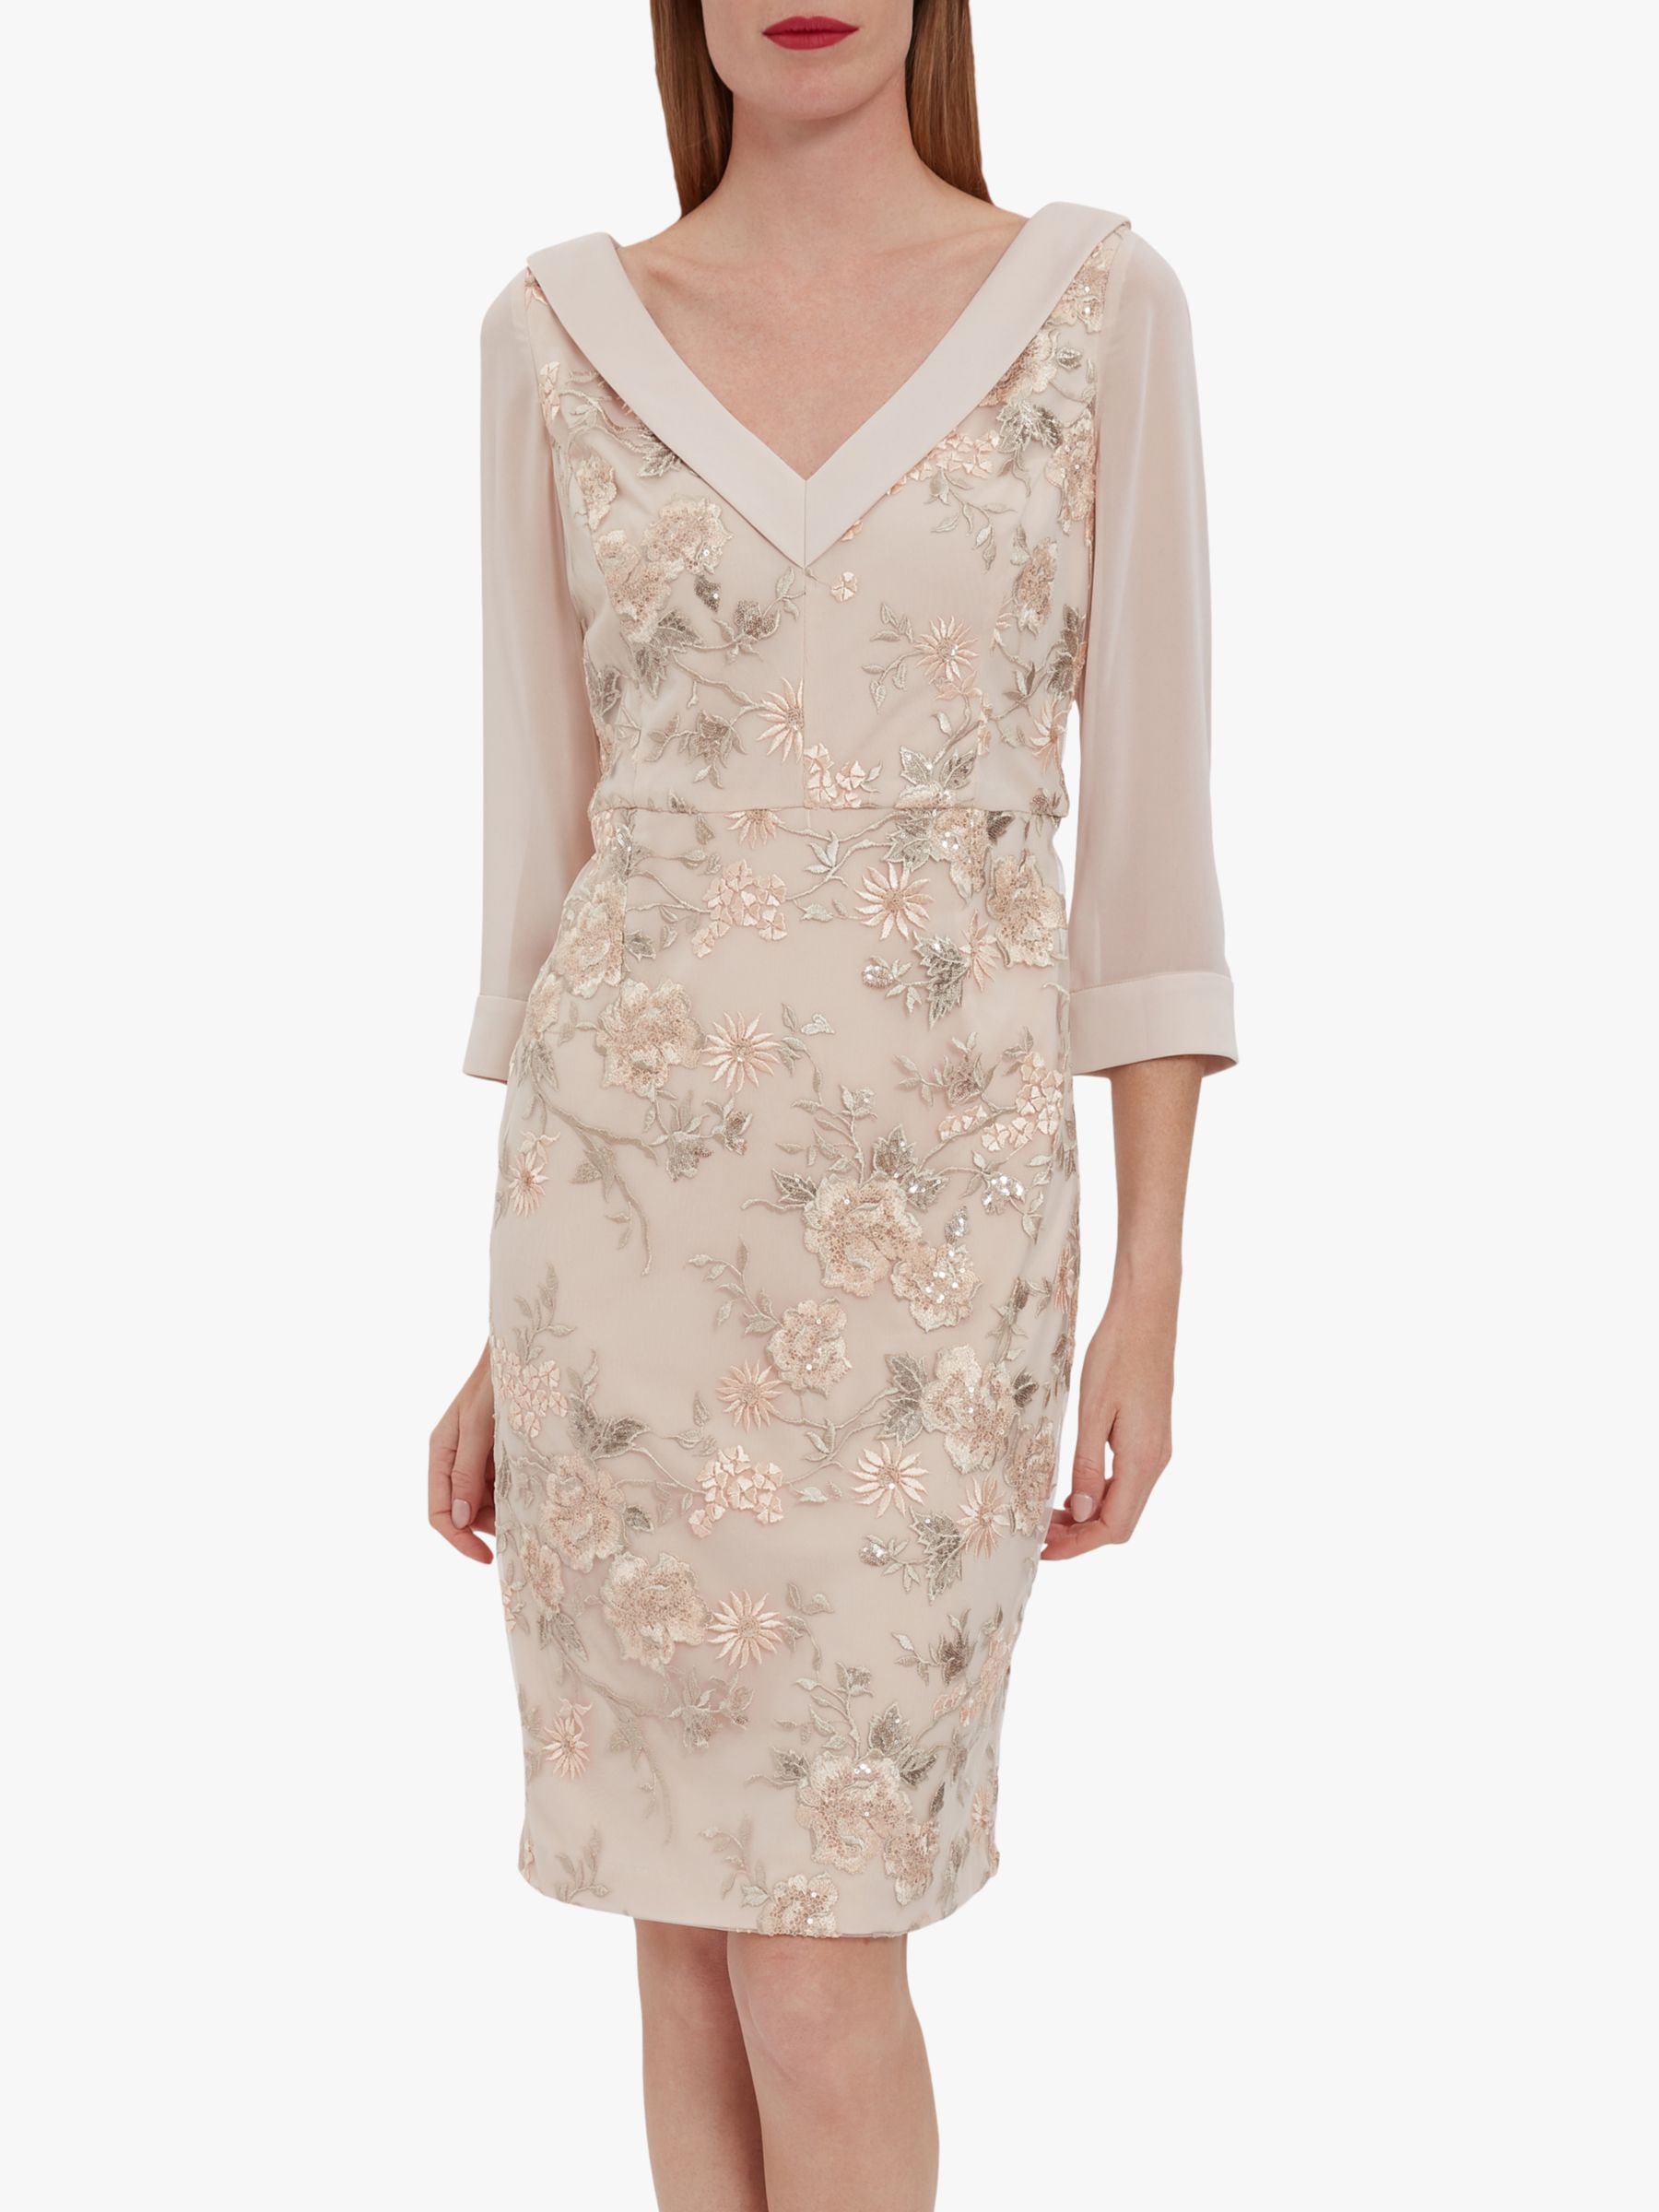 Gina Bacconi Kaye Floral Embroidery Shift Dress, Antique Rose